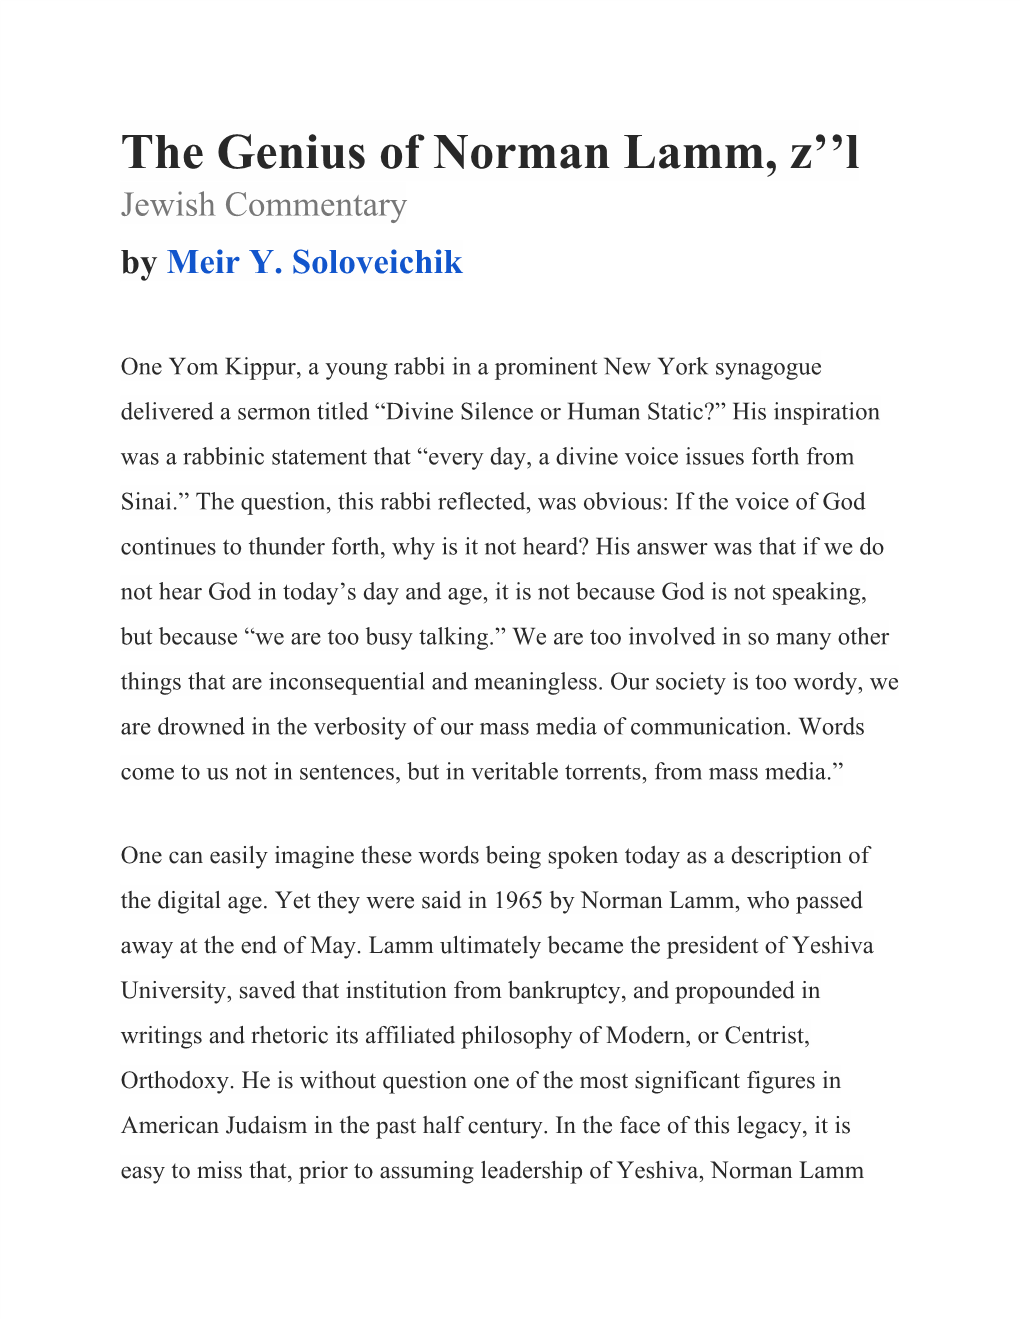 The Genius of Norman Lamm, Z’’L Jewish Commentary by Meir Y